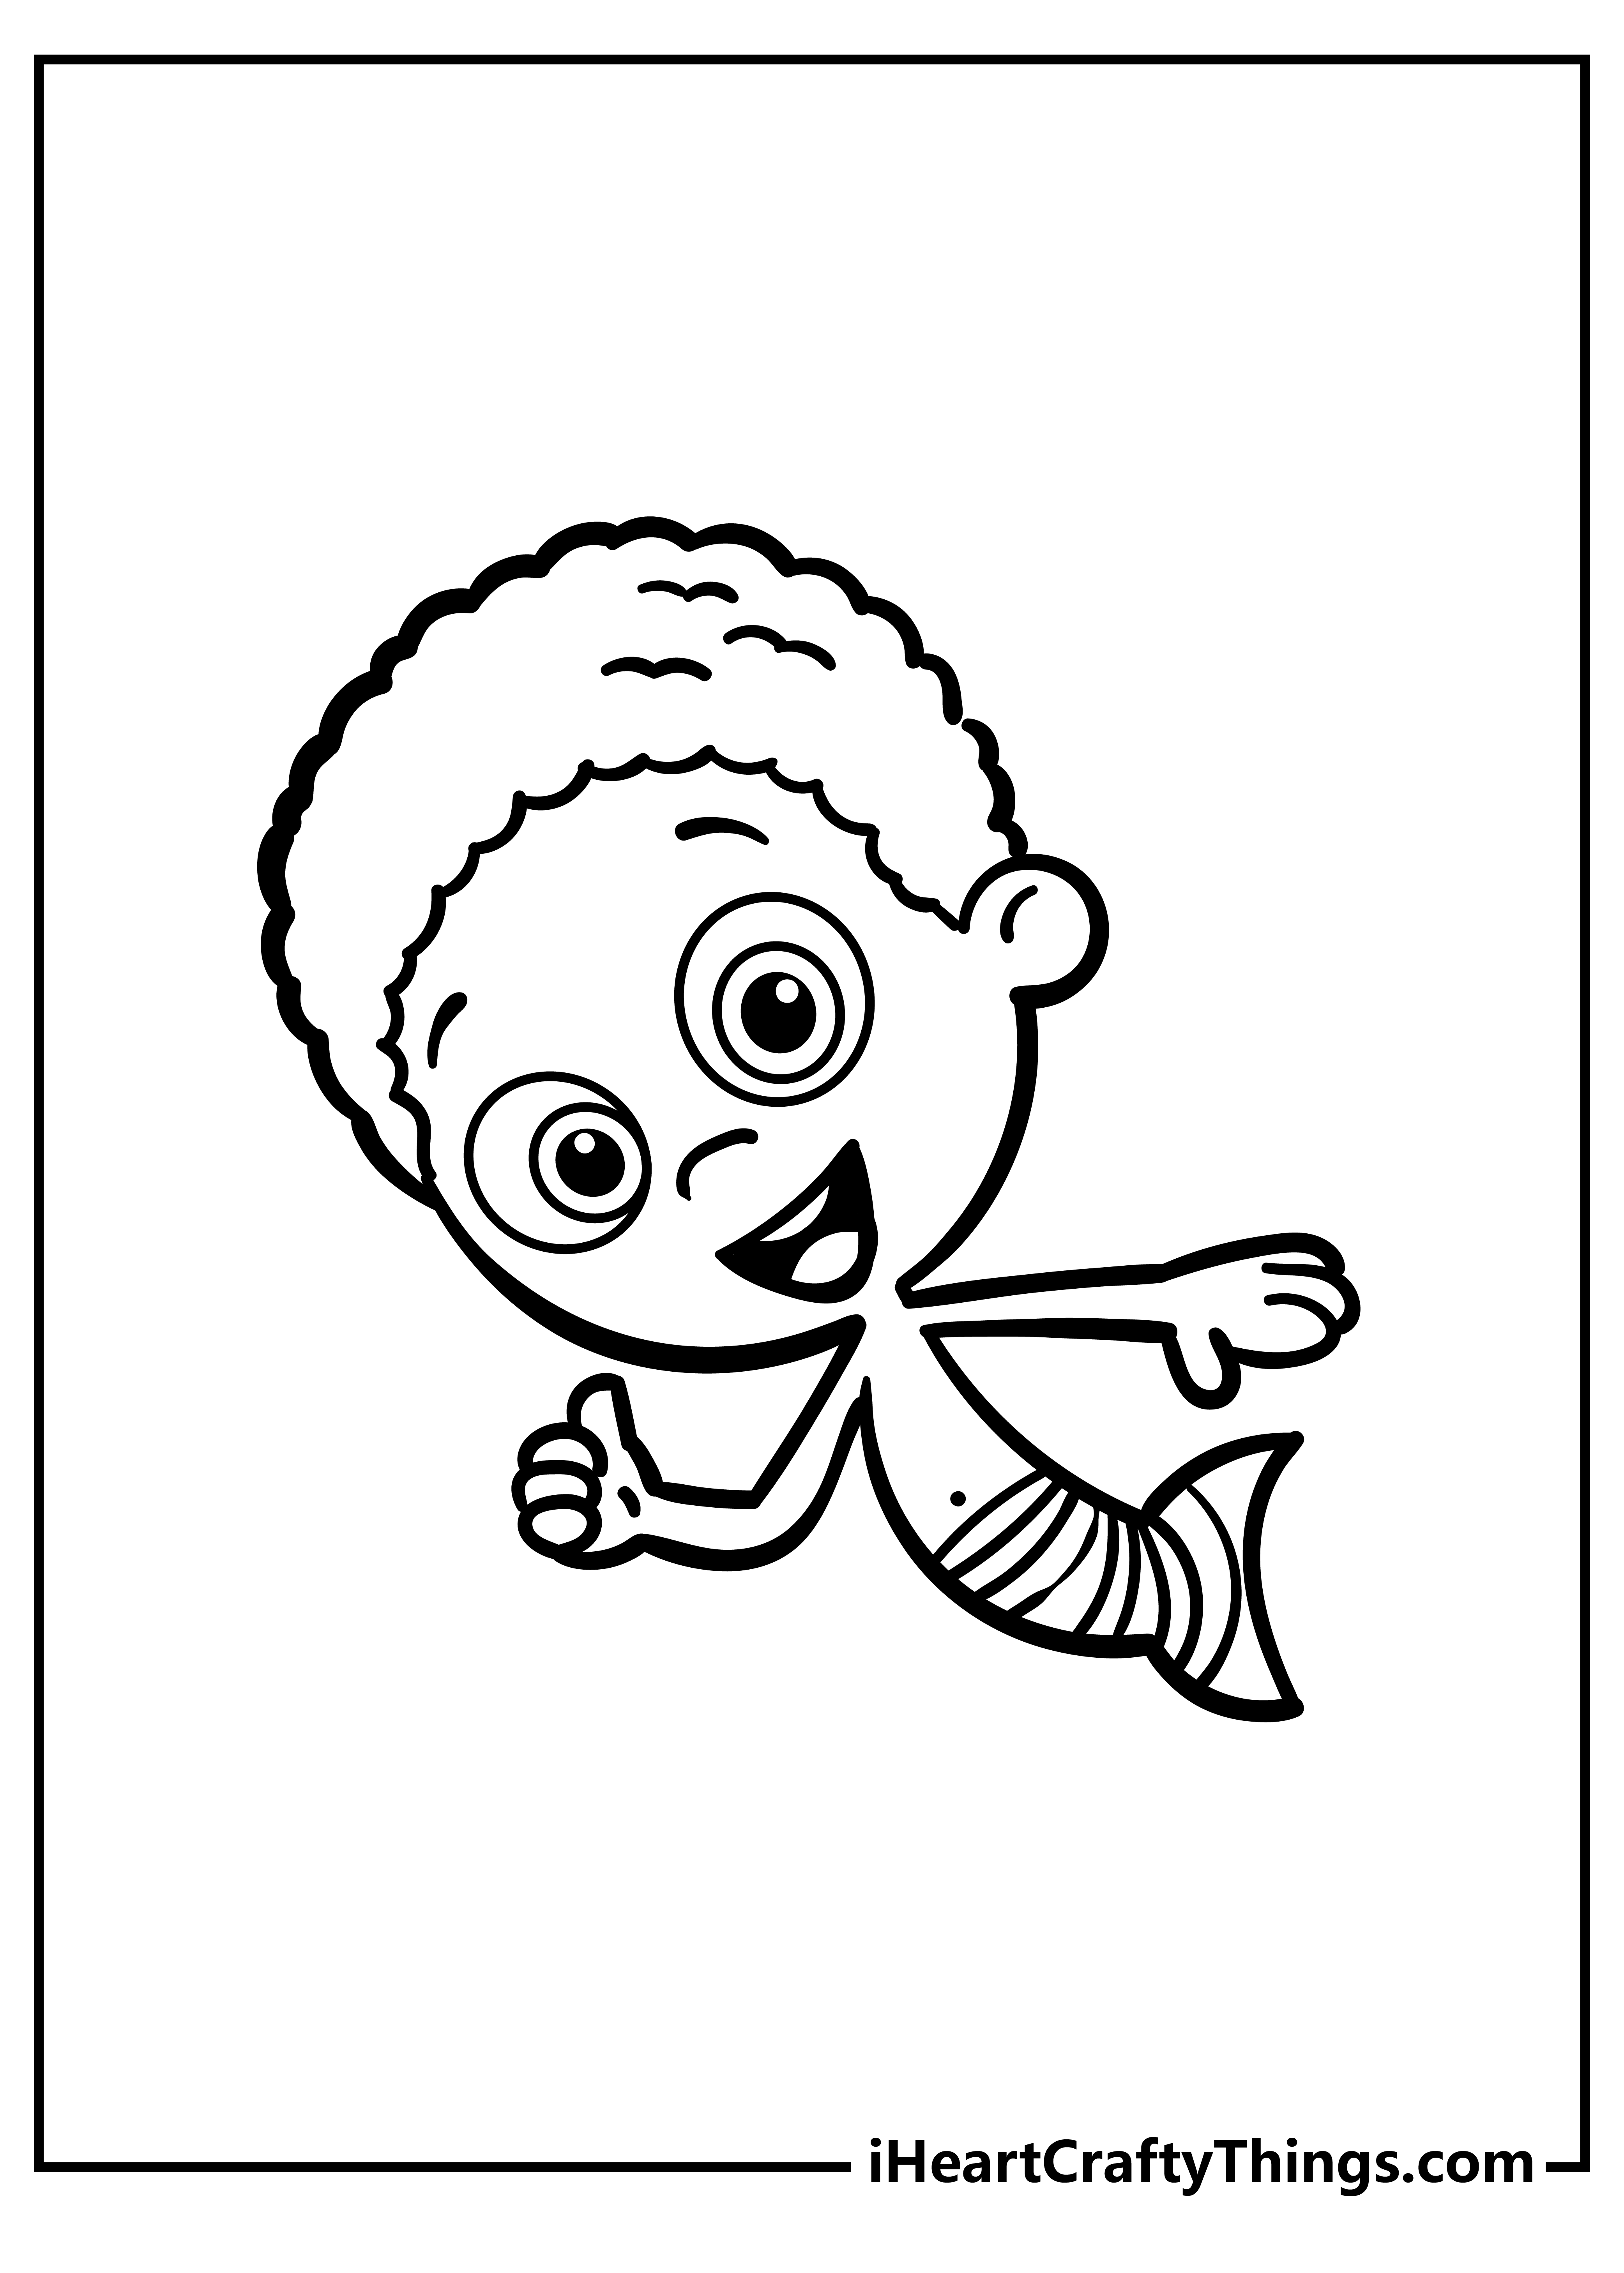 Bubble Guppies Coloring Pages free pdf download